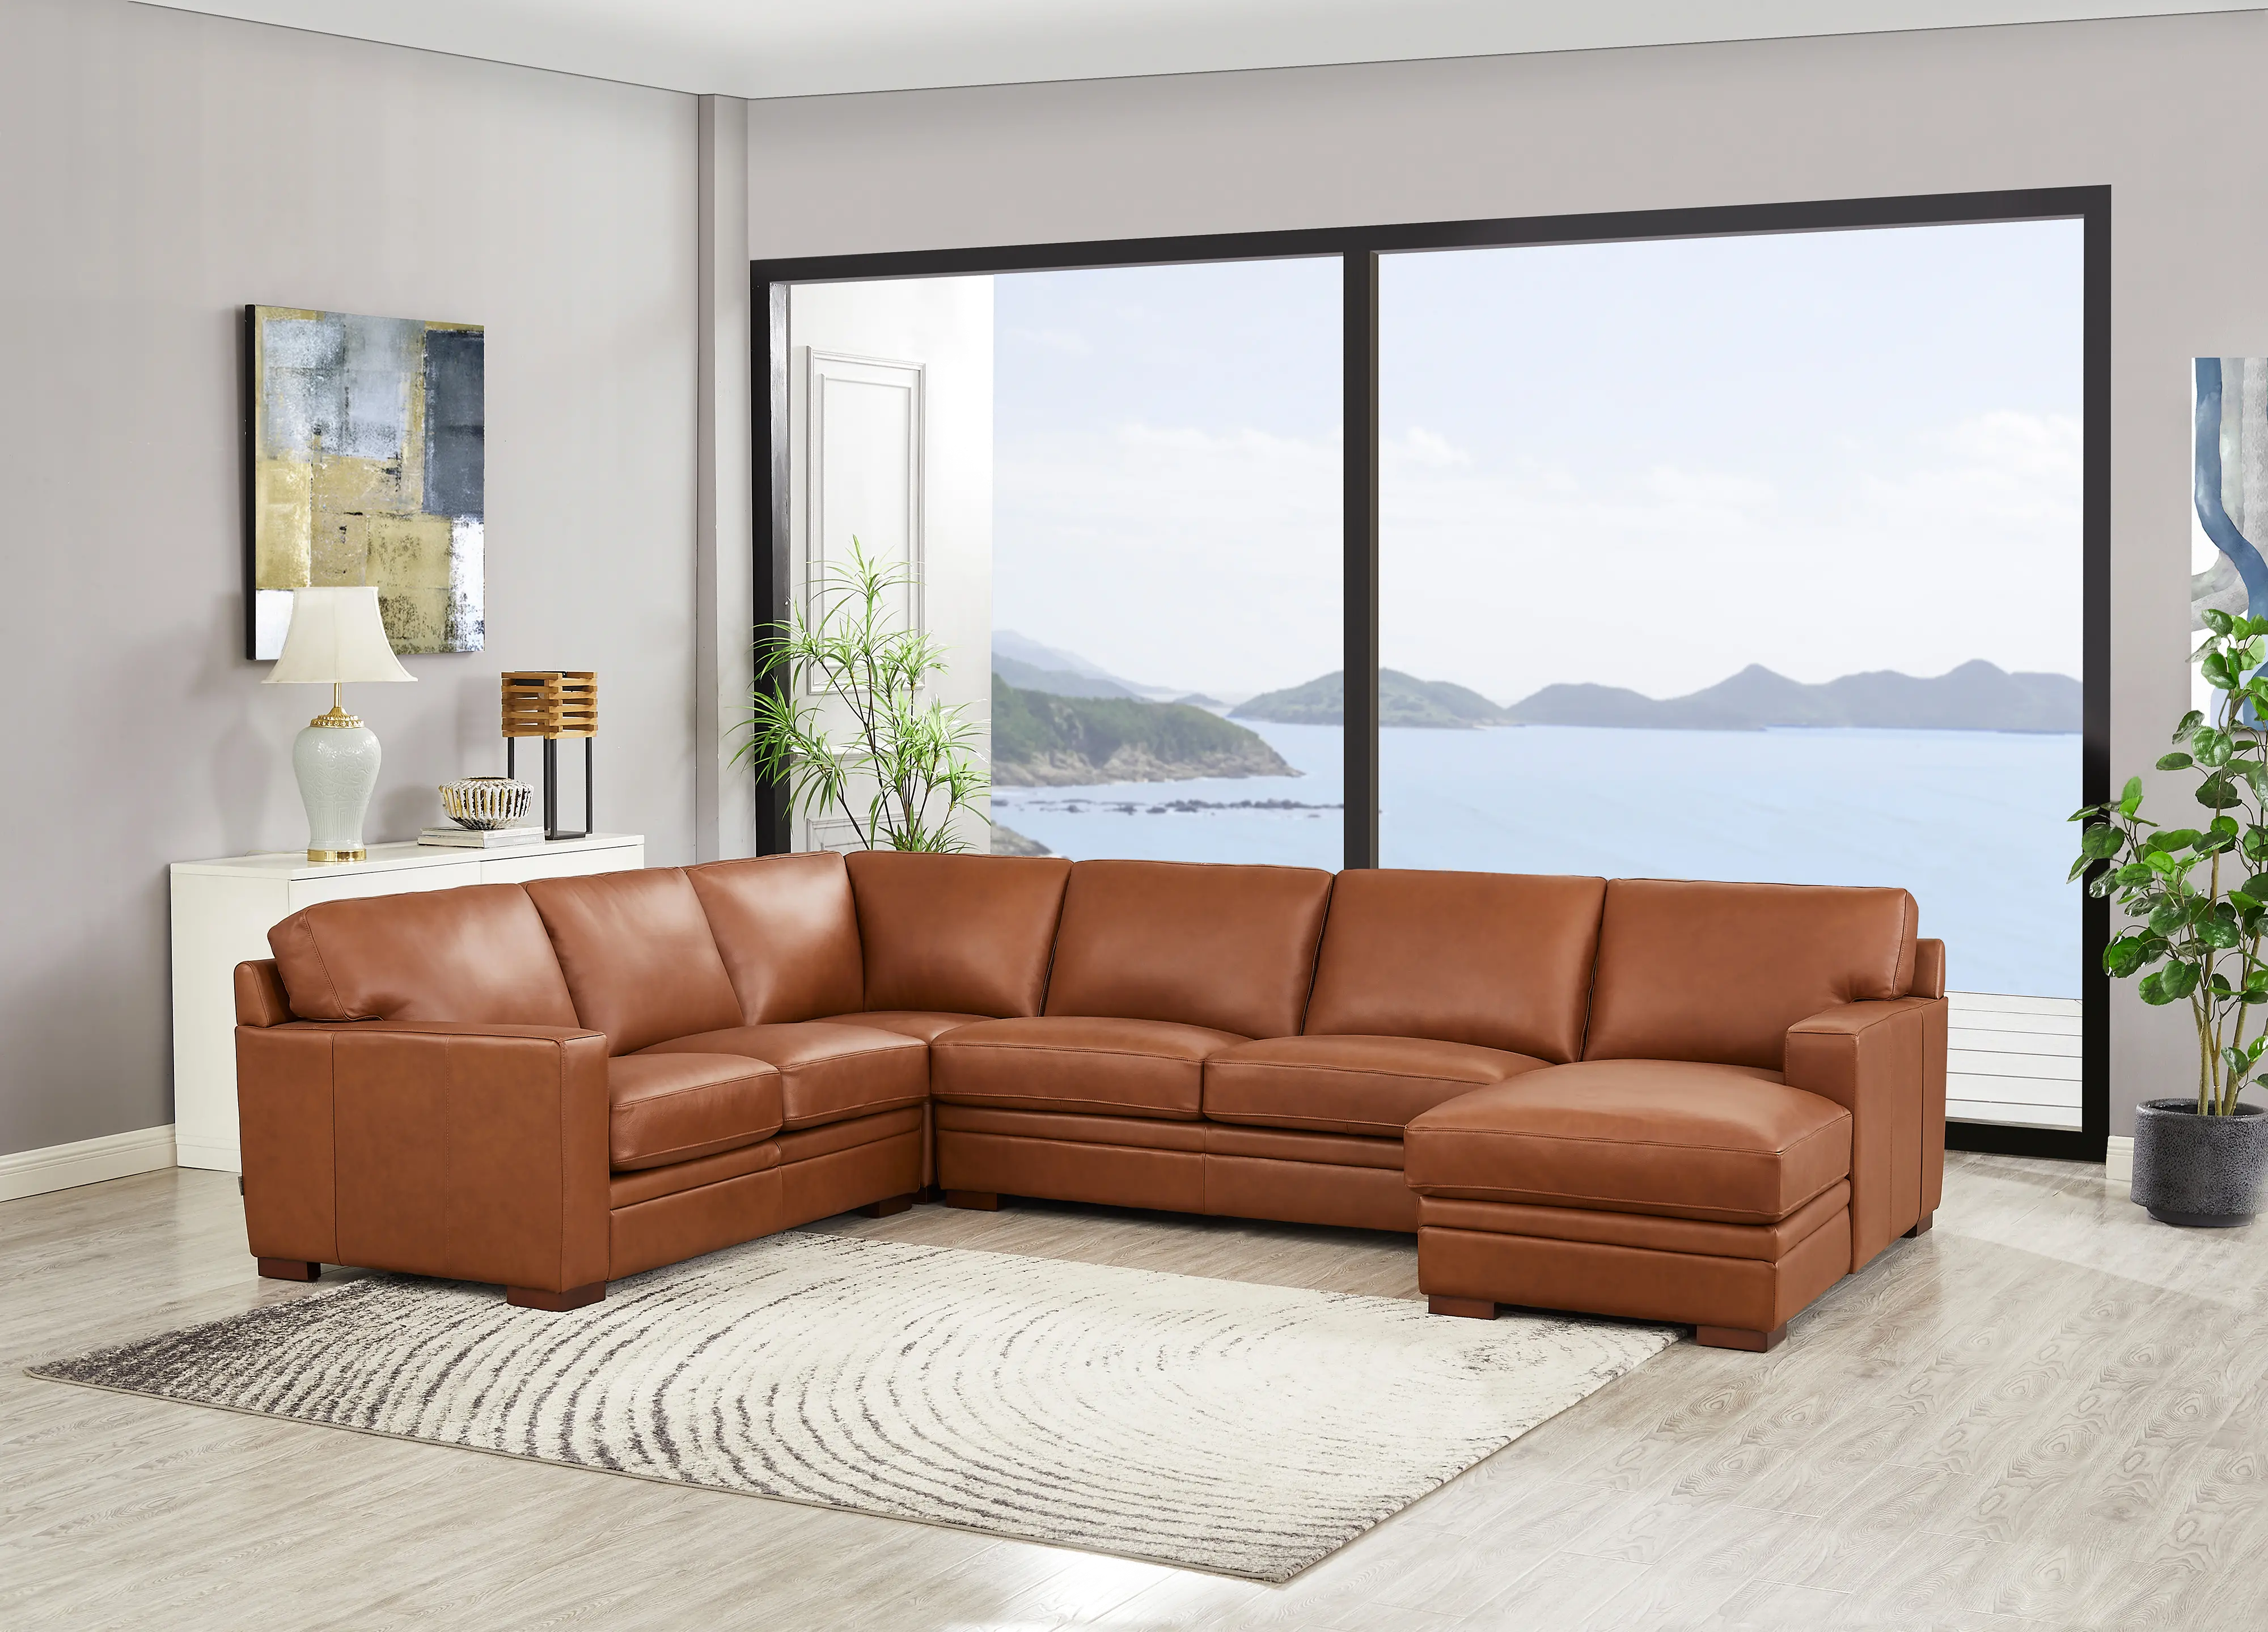 7727-SECT4-RHFCH-2362 Chatsworth Brown Leather 4 Piece Sectional with Ri sku 7727-SECT4-RHFCH-2362